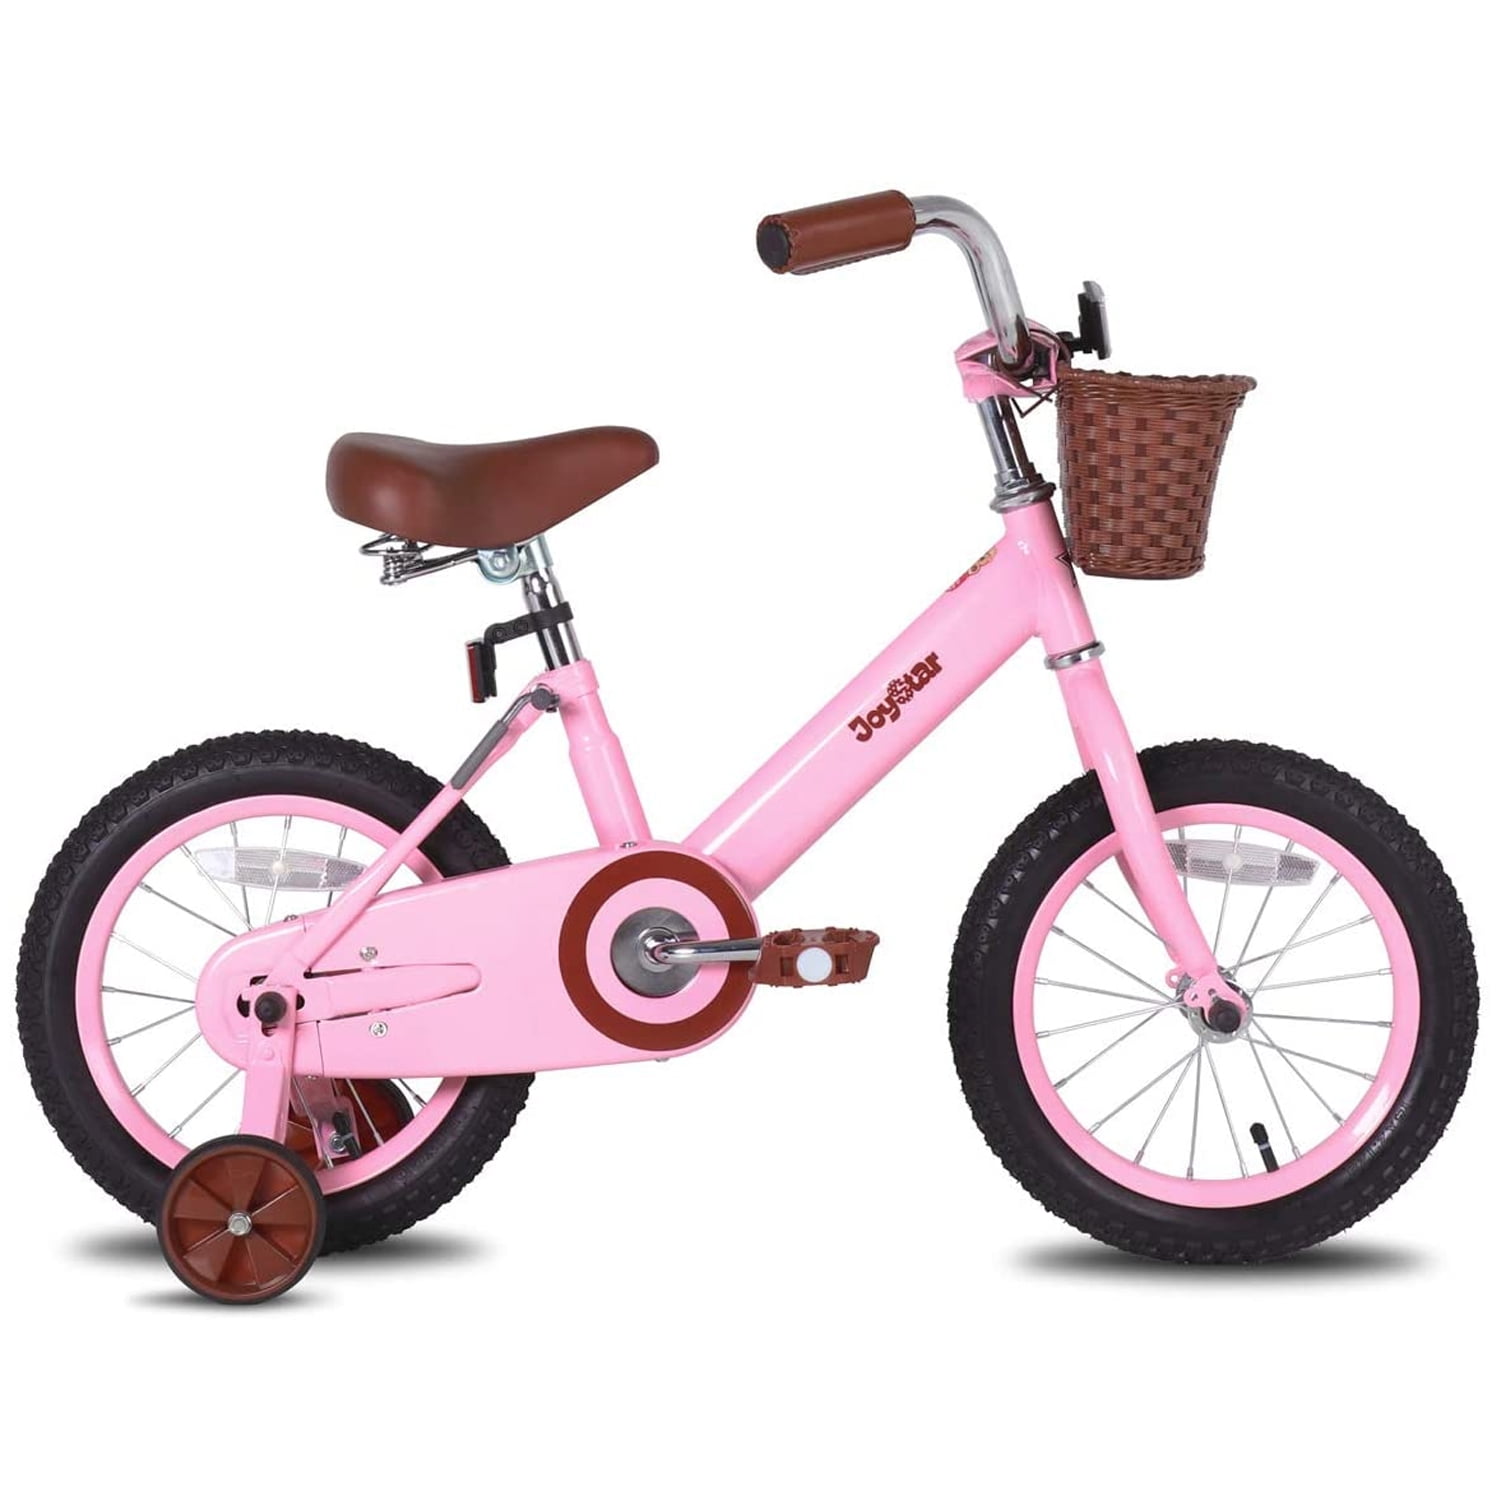 Children Bicycle JOYSTAR Starry Kids Bike with Hand Brake and Basket for 3-9 Years Girls 14 16 18 Inch Youth Bike with Training Wheels and Fenders